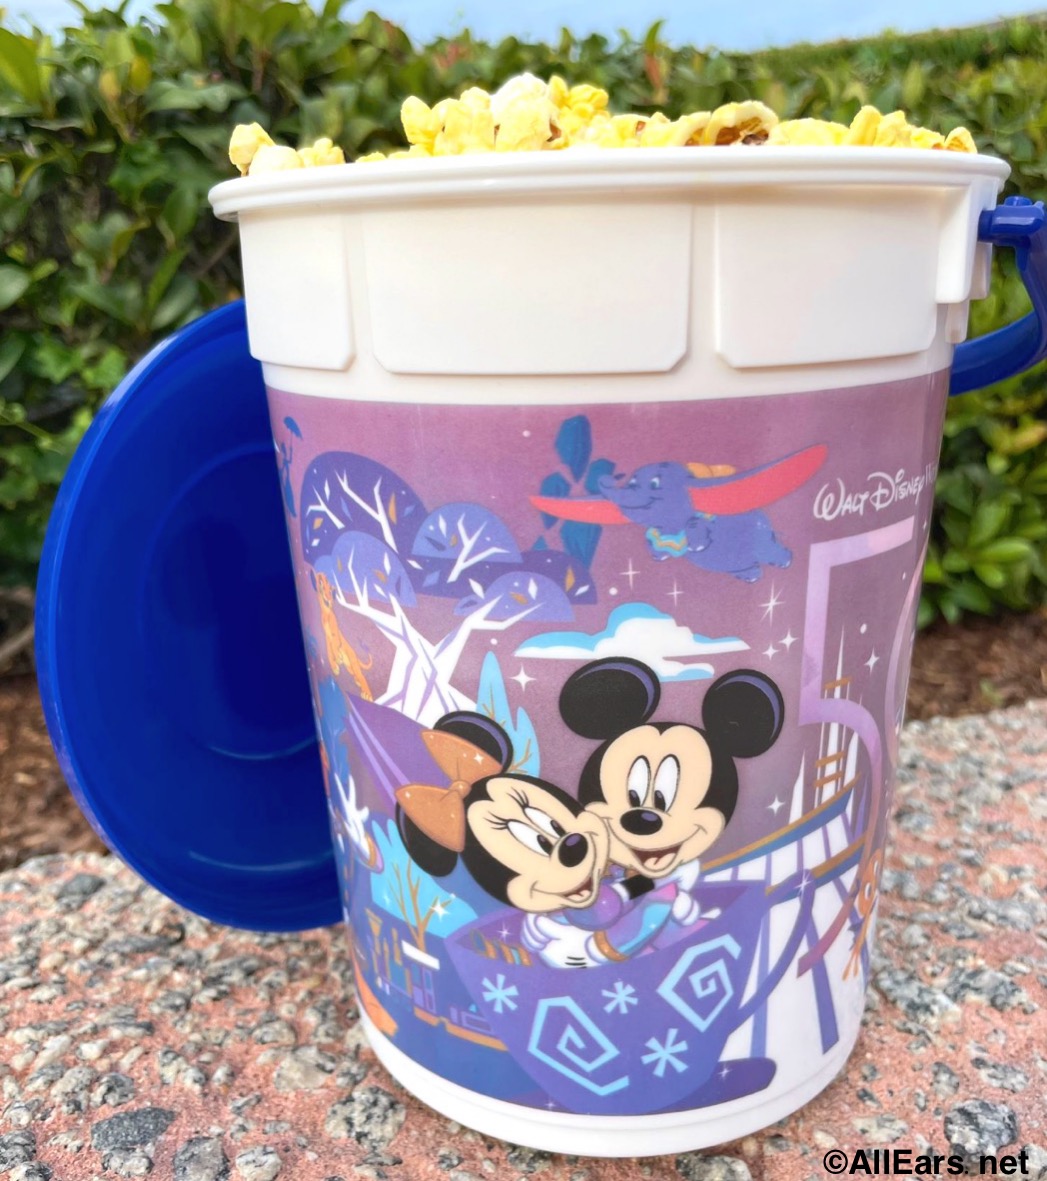 PHOTOS: There’s a New 50th Anniversary Popcorn Bucket in Disney World allears.net